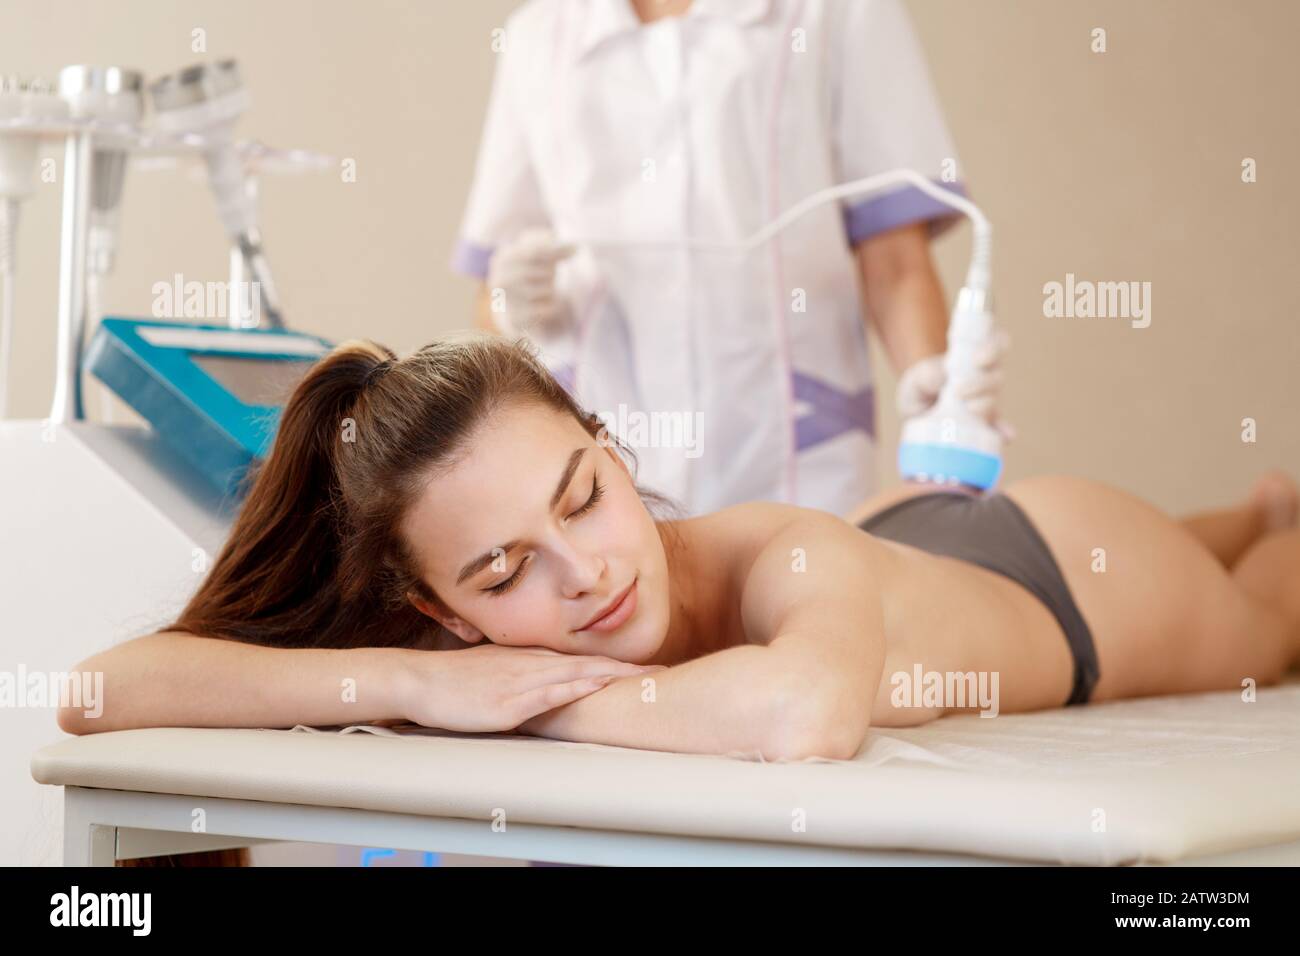 Hardware cosmetology. Body care. Spa treatment. Ultrasound cavitation body contouring treatment. Woman getting anti-cellulite and anti-fat therapy in beauty salon Stock Photo